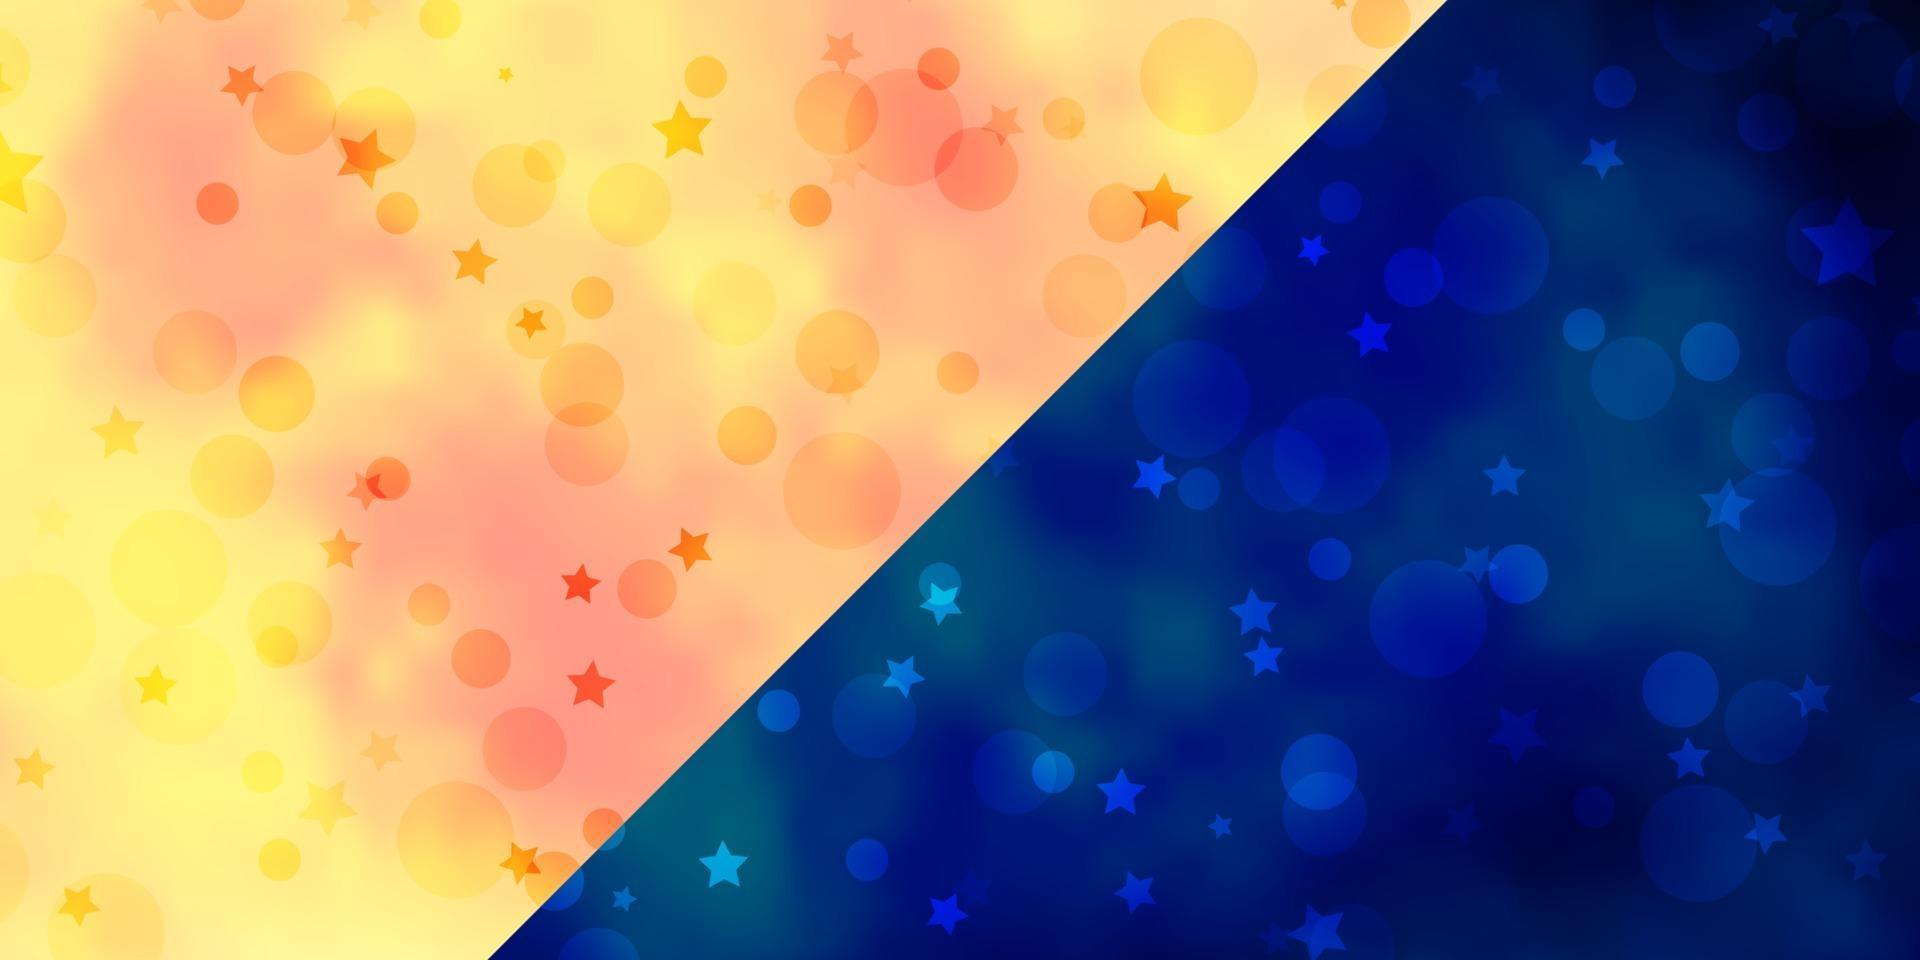 Vector texture with circles, stars.